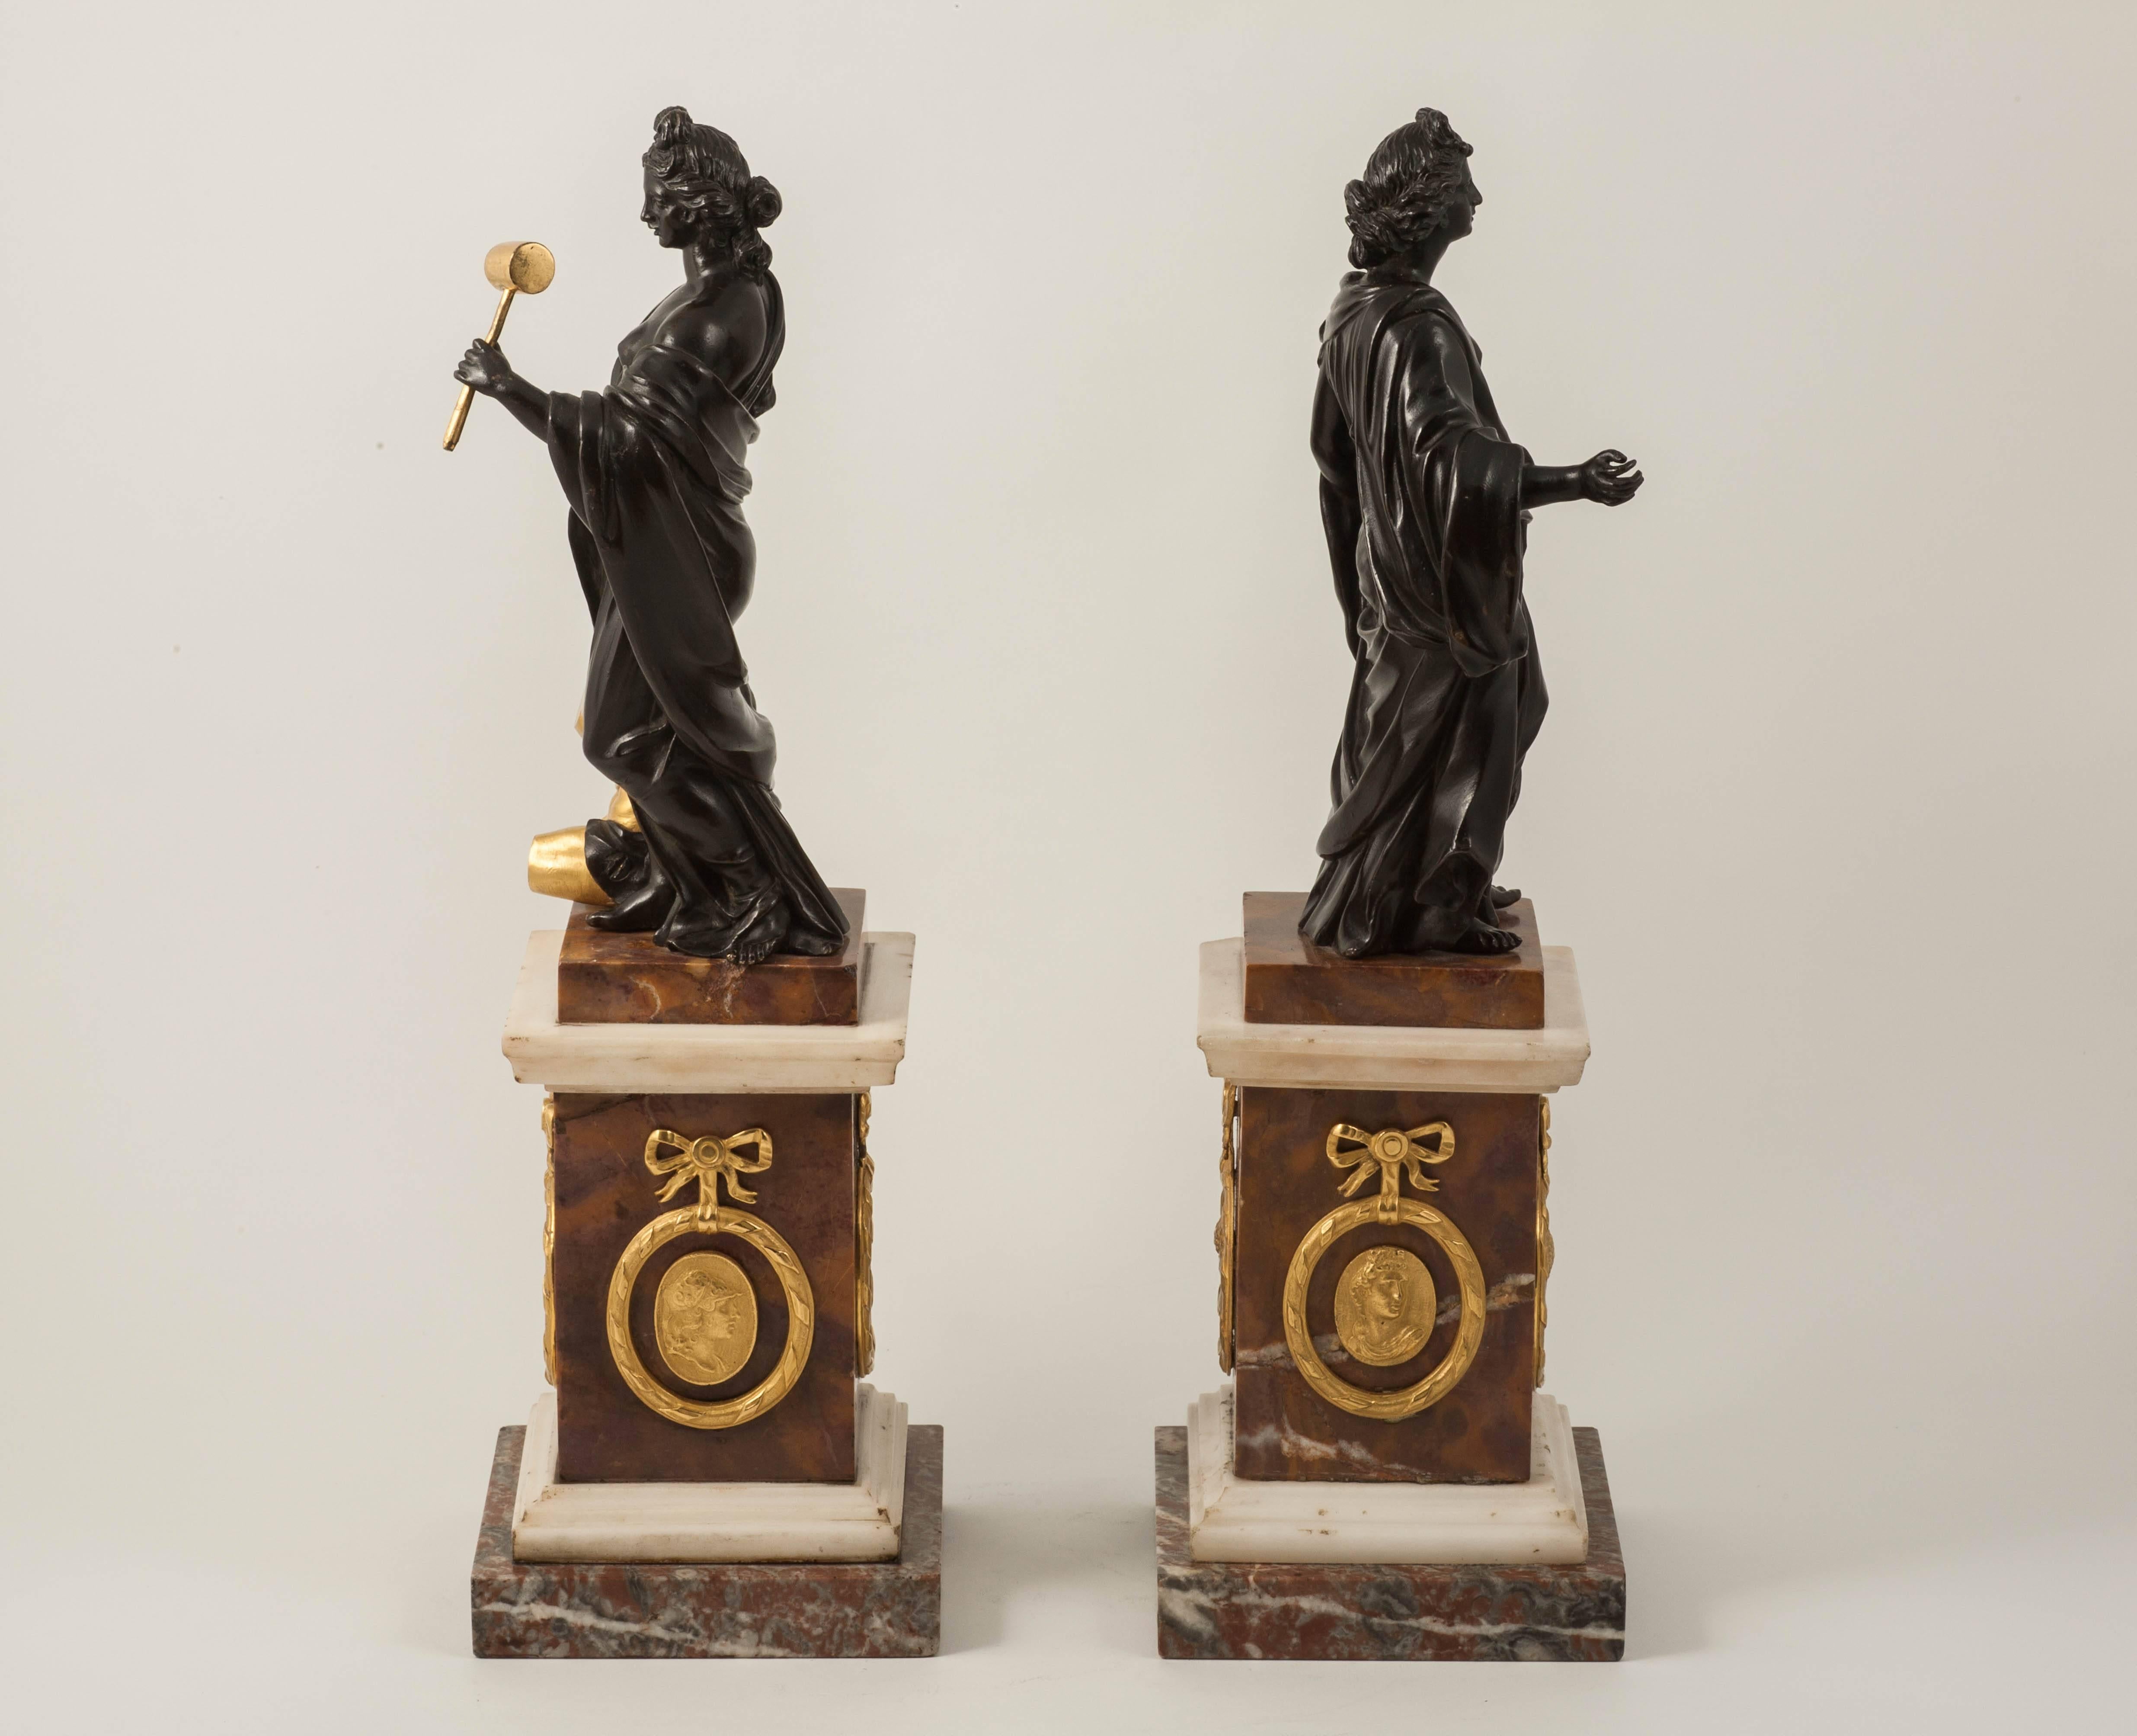 Rare Pair of Allegorical Bronze Figures Attributed to Valadier, Rome, circa 1780 In Excellent Condition For Sale In London, GB